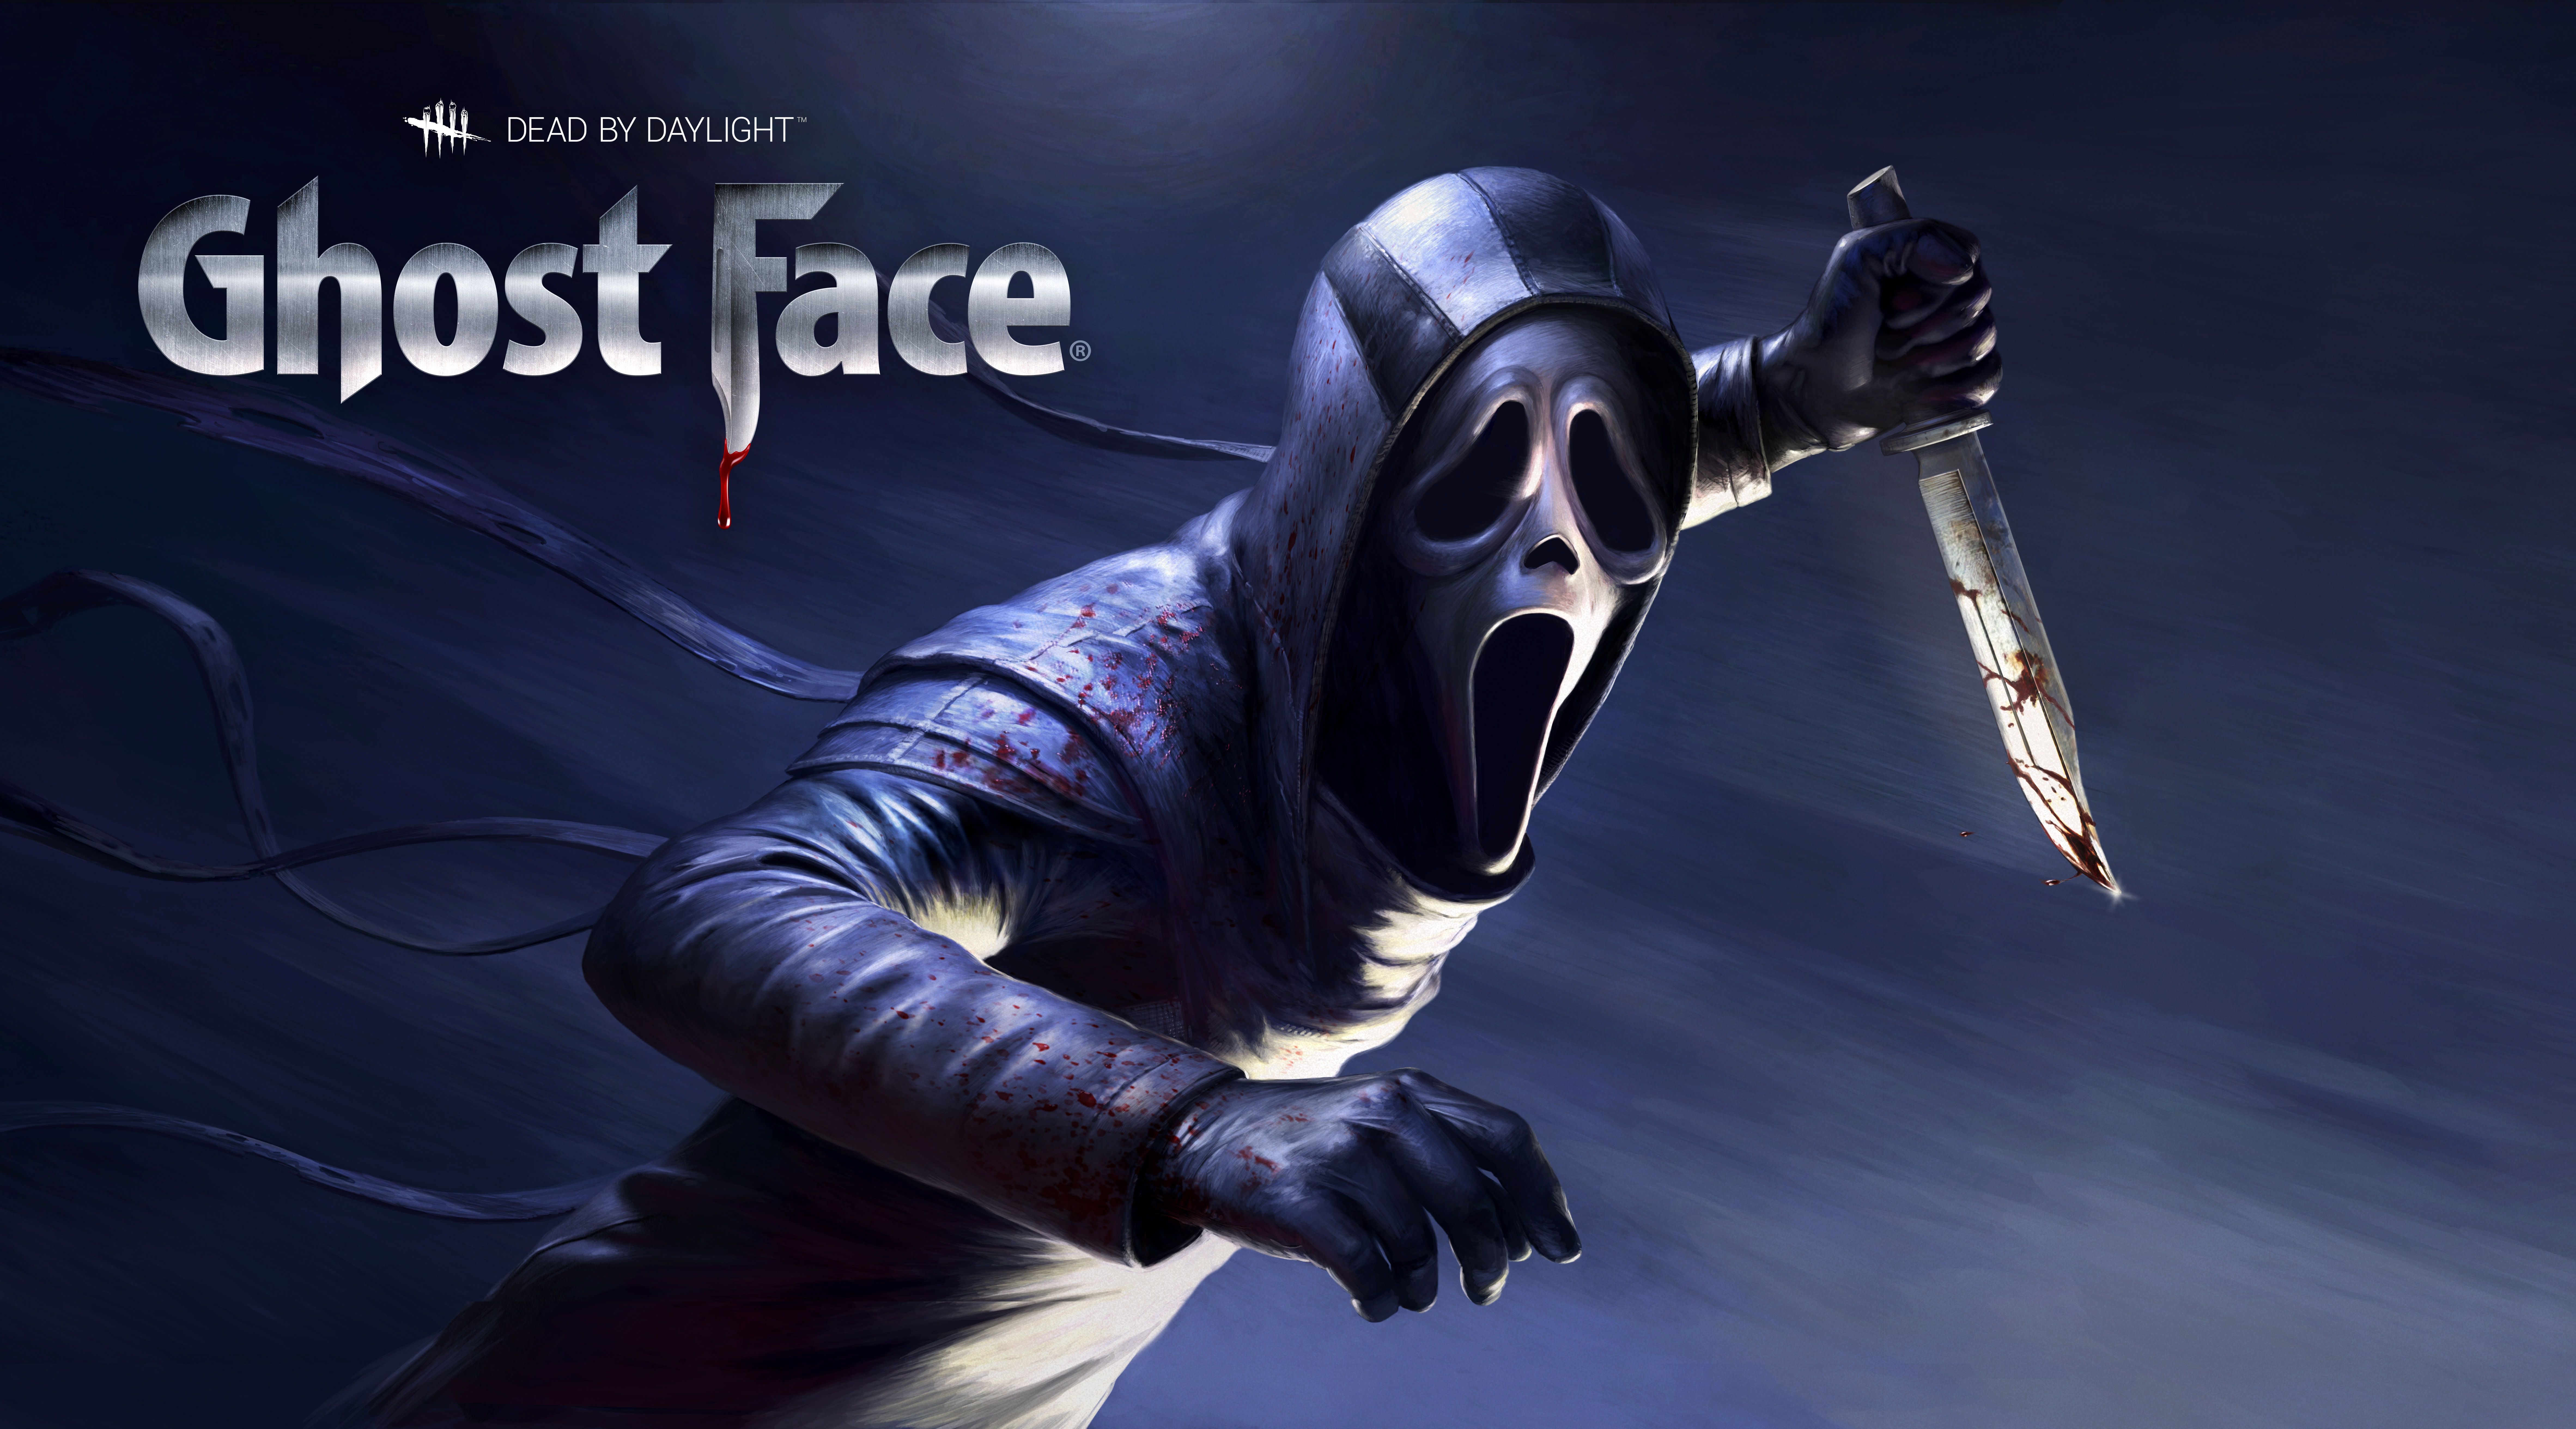 A poster for the horror game ghost face - Ghostface